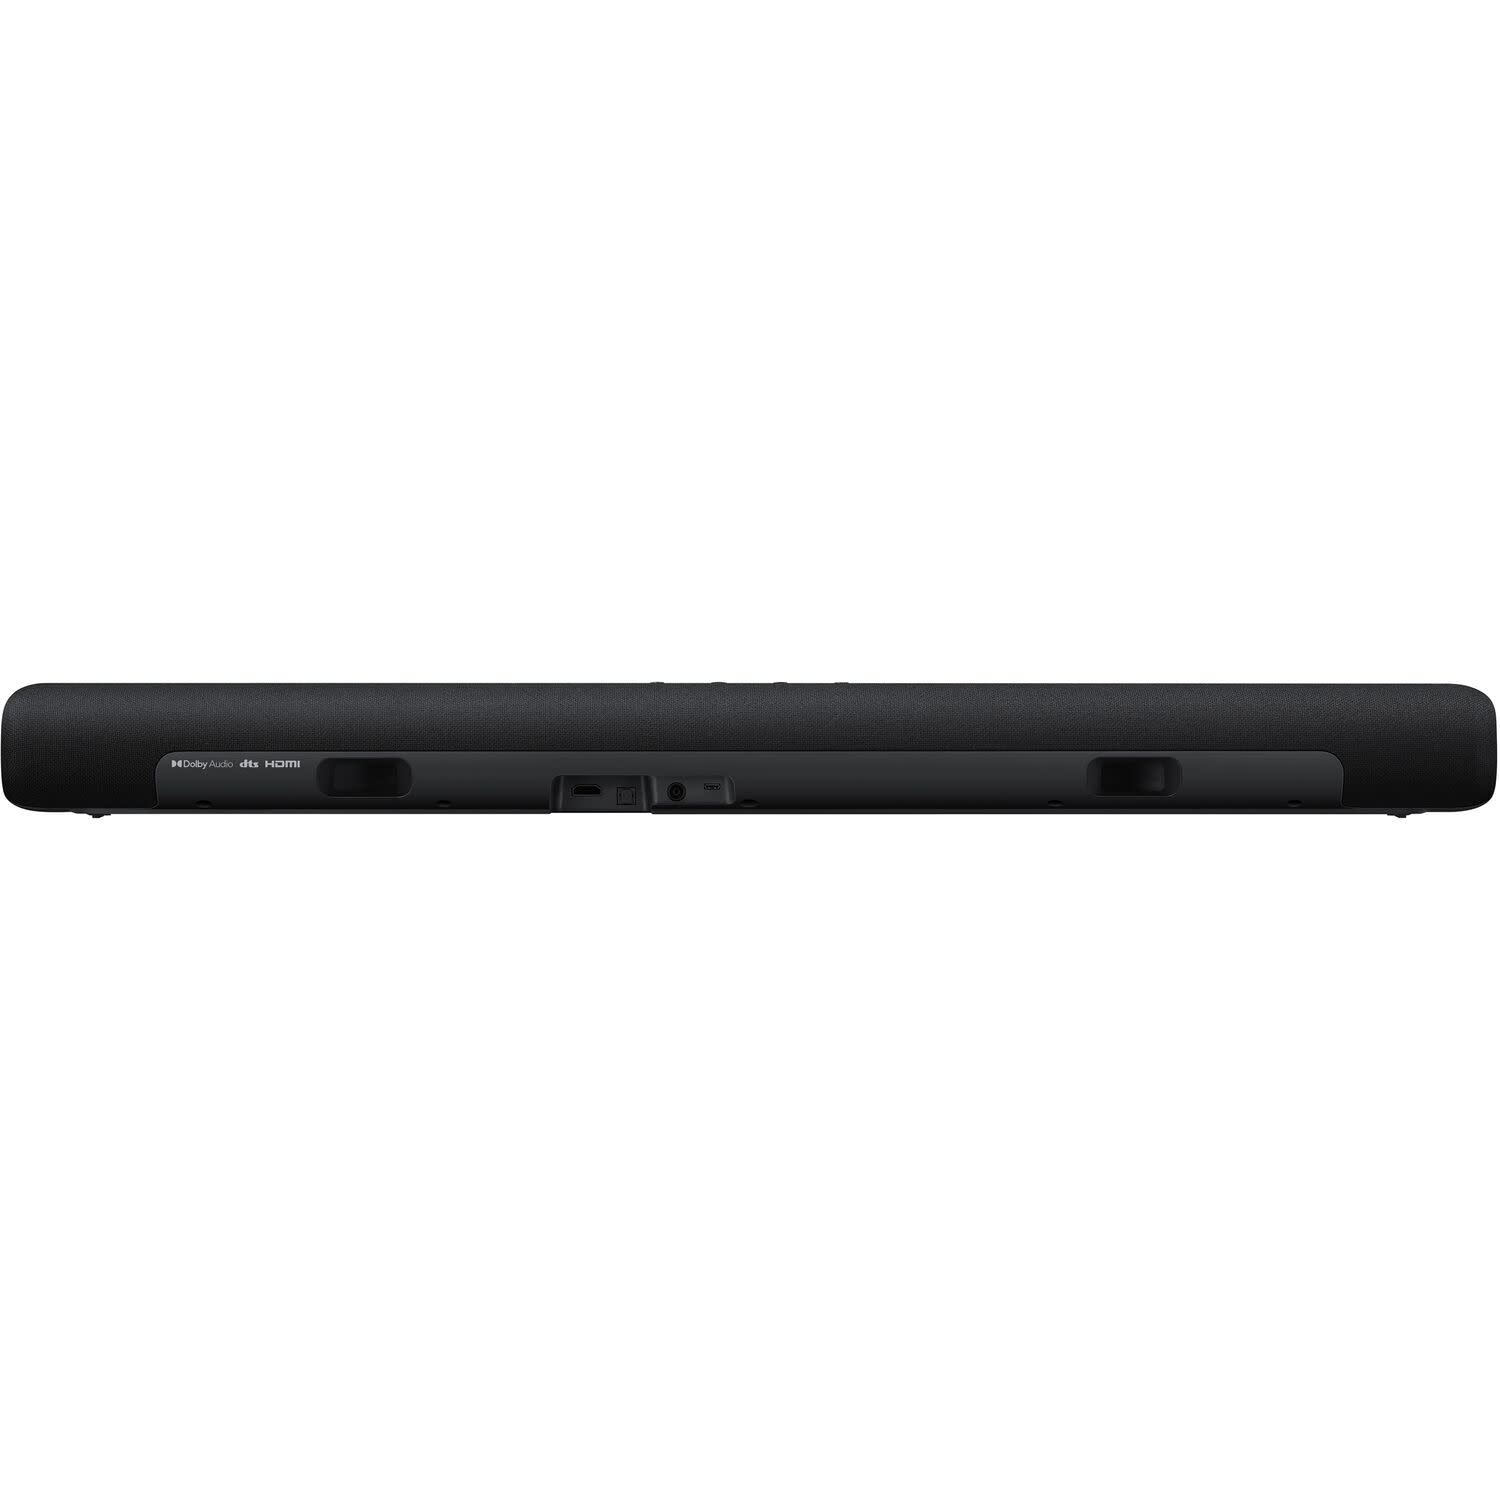 SAMSUNG HW-S50A 3.0 Channel All-in-One Soundbar with DTS Virtual:X - image 5 of 6